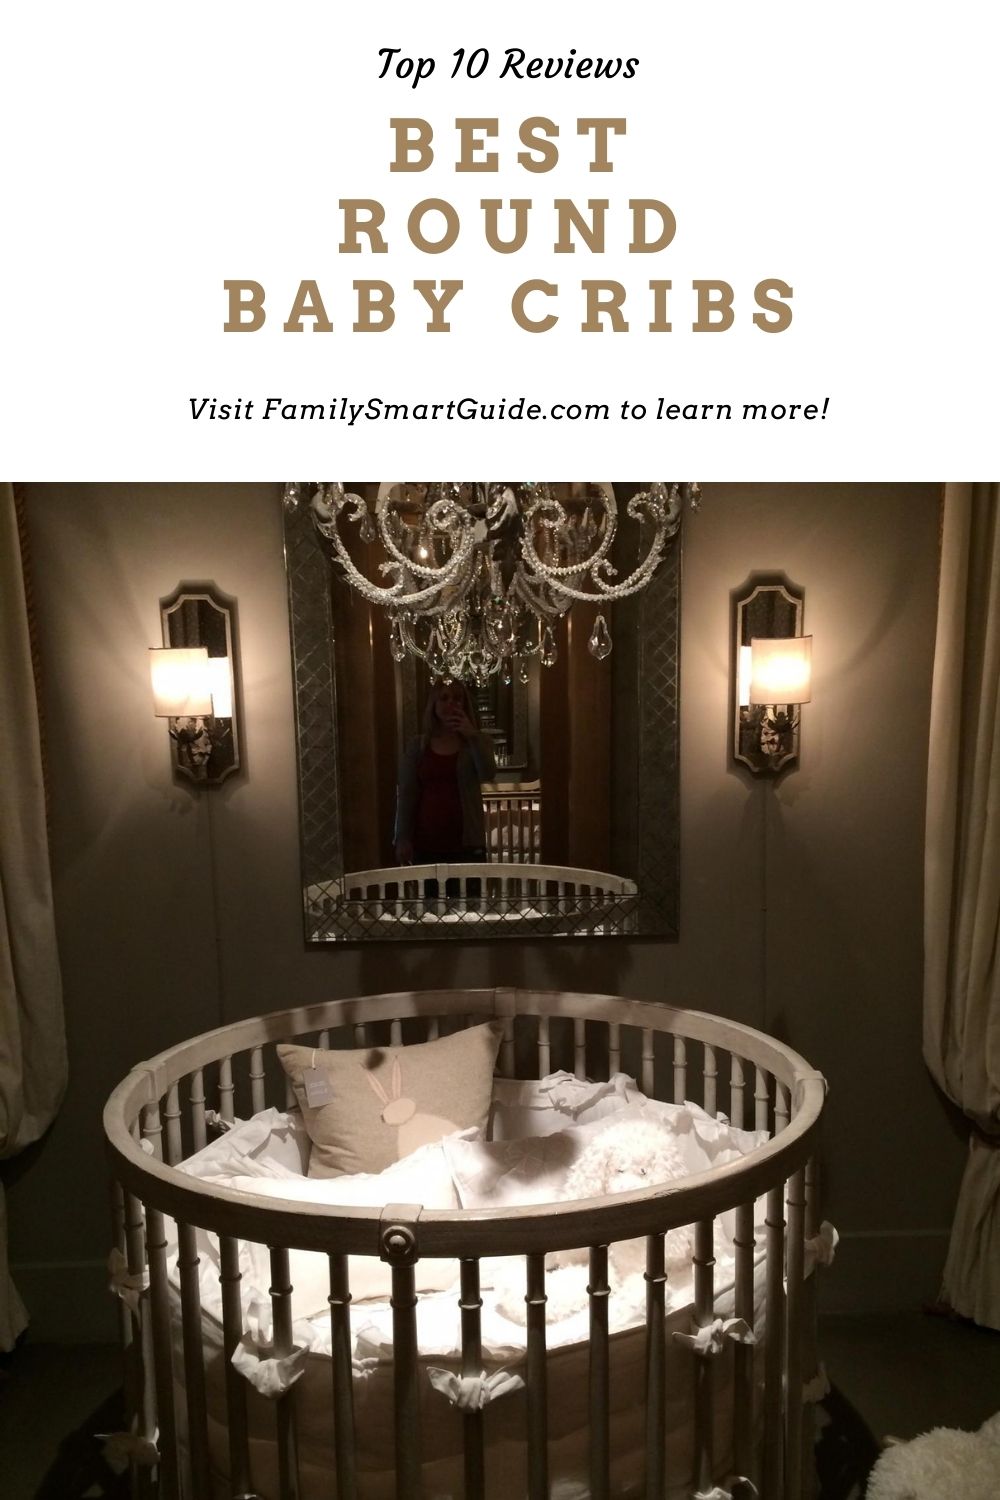 Top 10 Round Baby Cribs Review